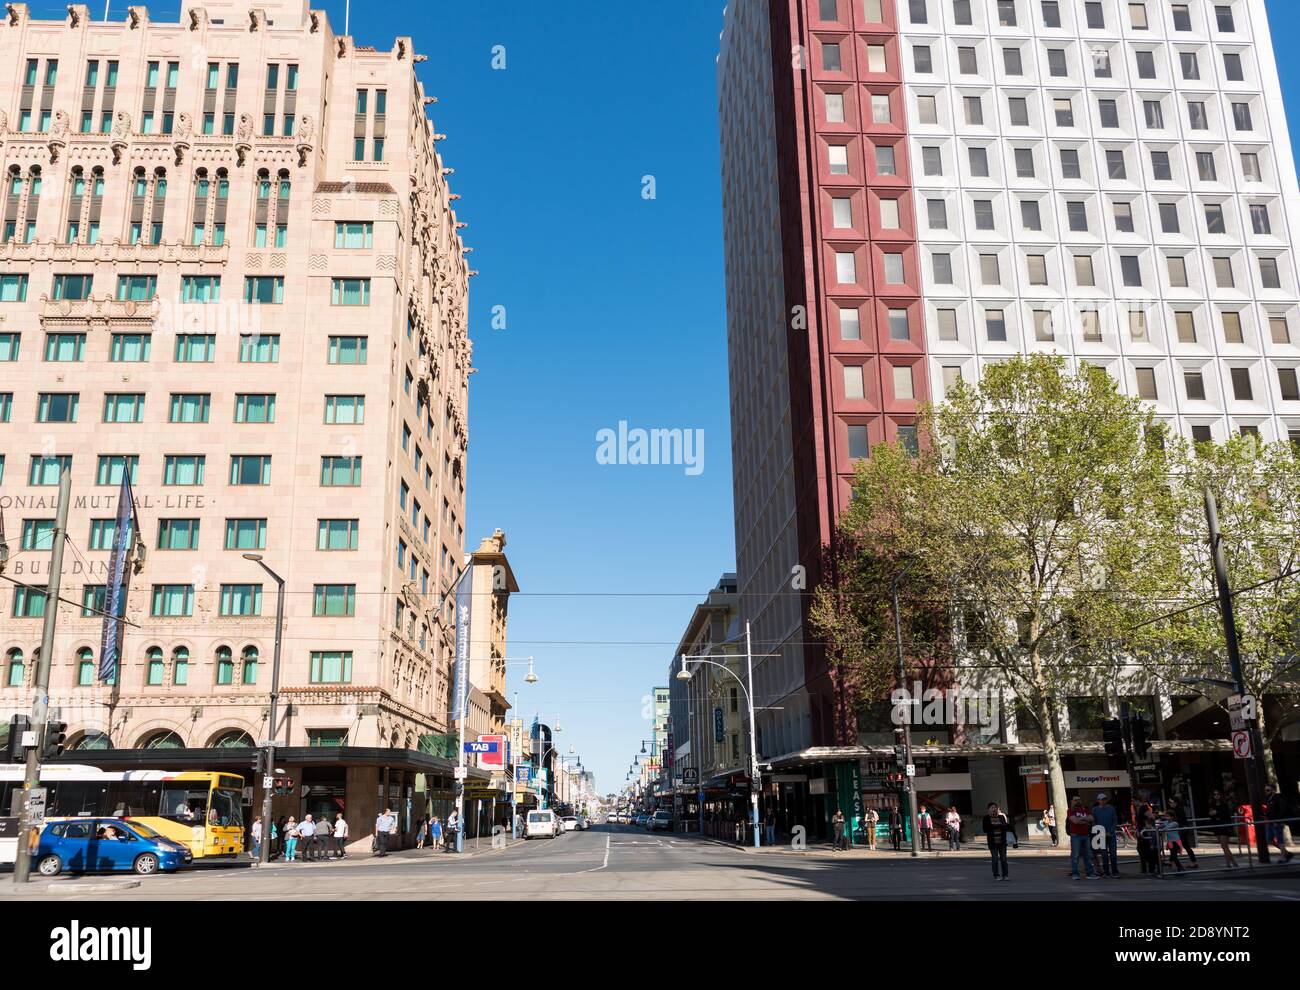 Shoppers and traffic on the corner of King William Street and Hindley Street, opposite Rundle Mall, Adelaide, SA, South Australia Stock Photo